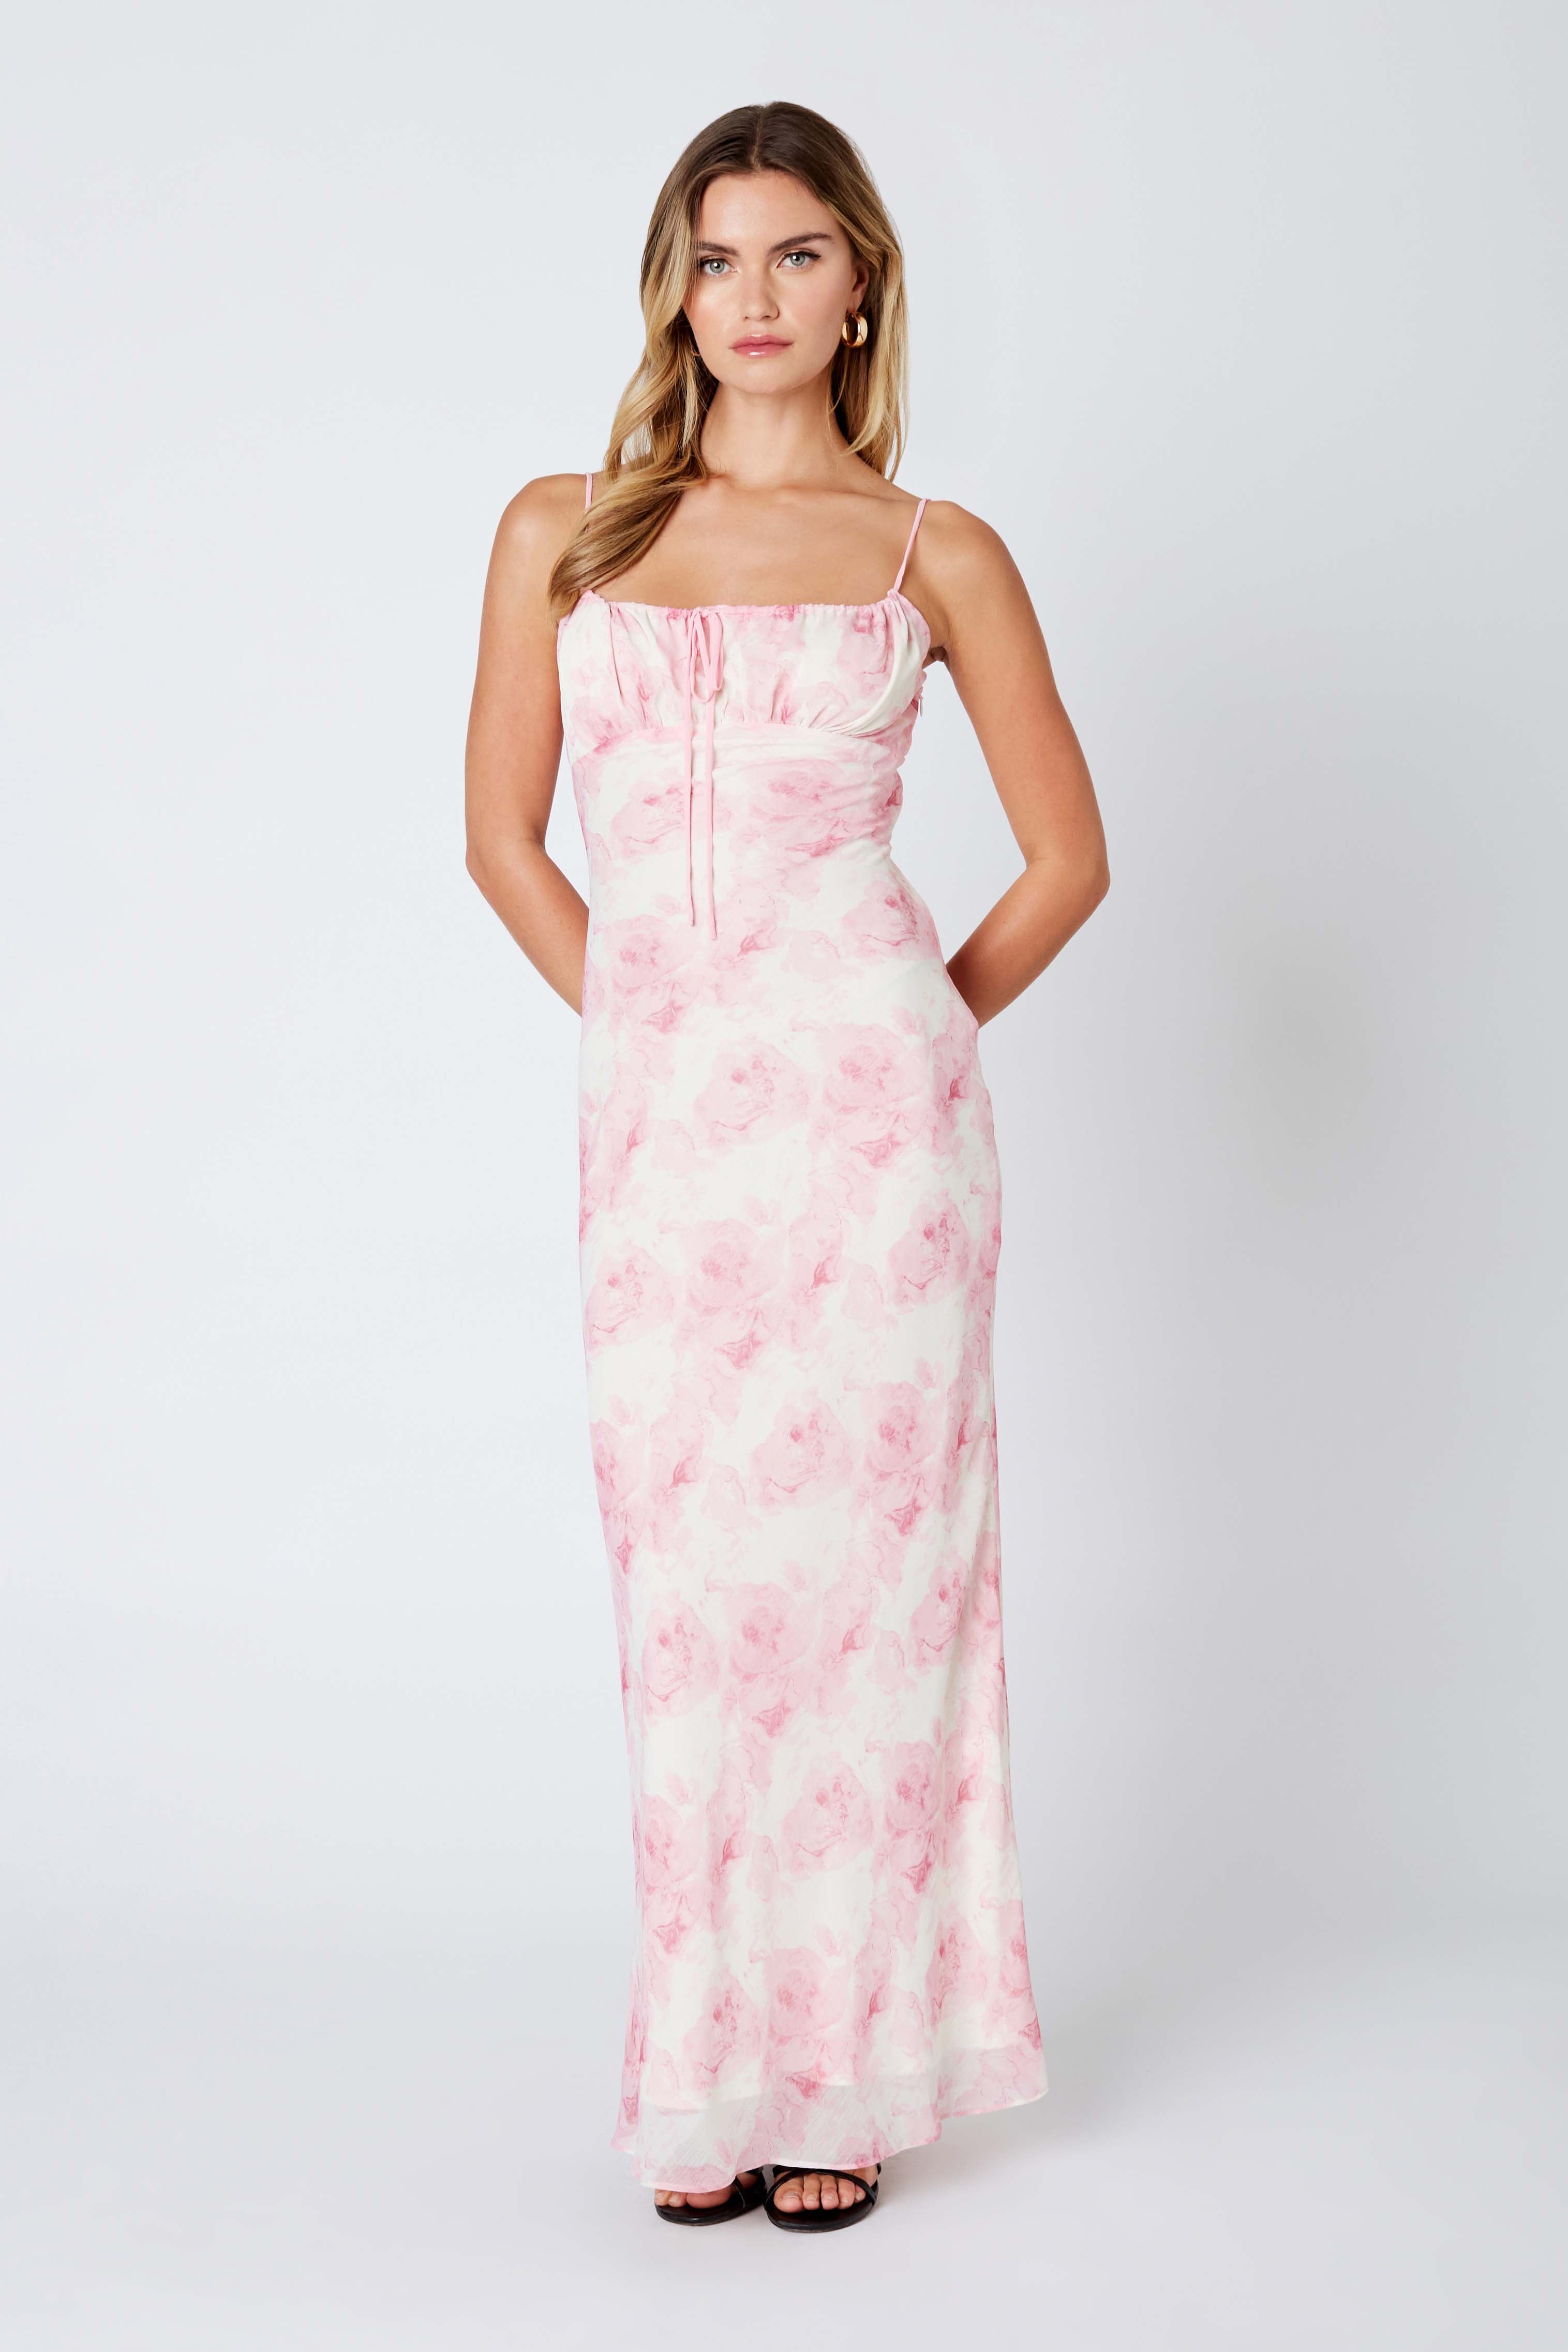 Floral Maxi Dress in Cameo Pink Front View